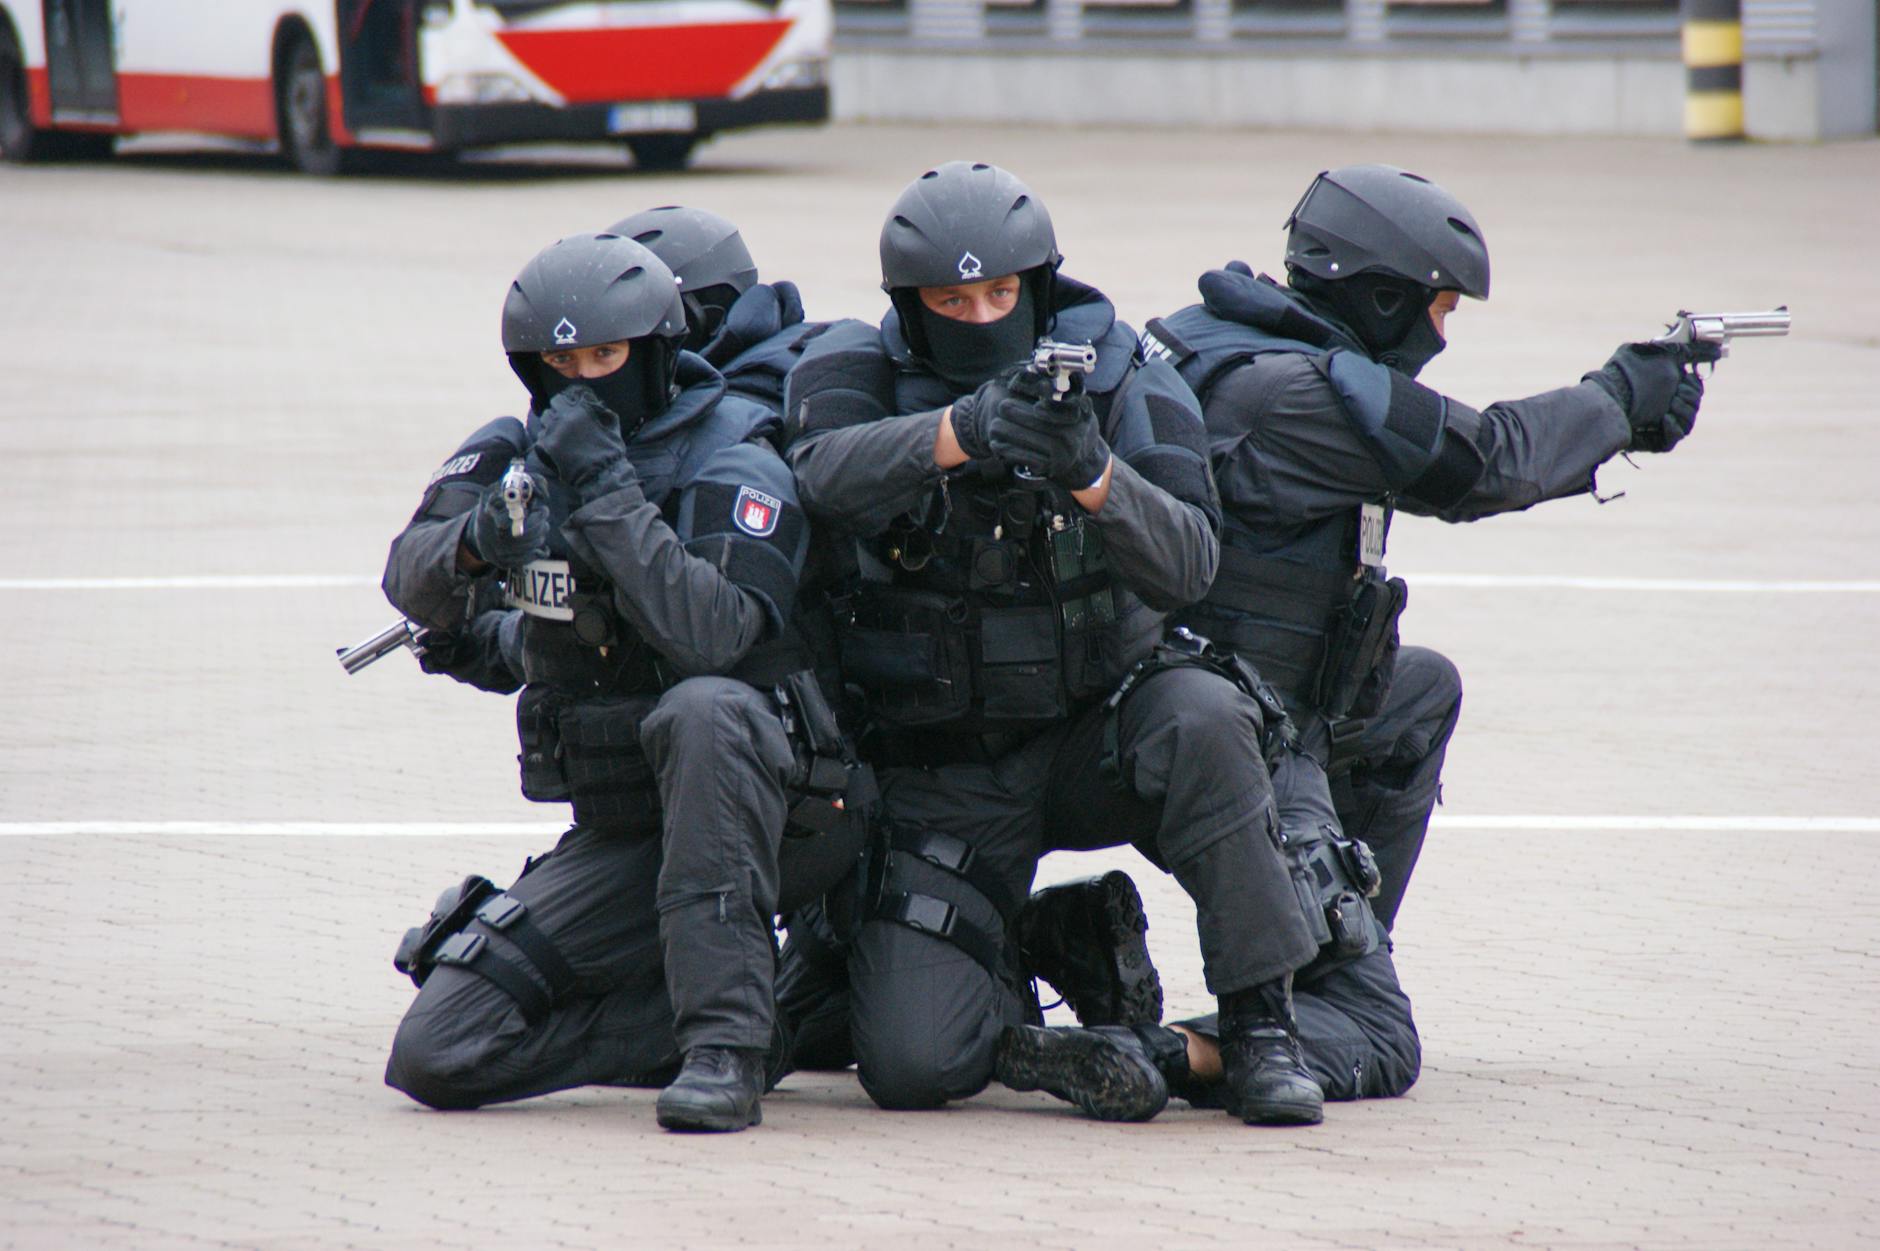 police swat team during an exercise